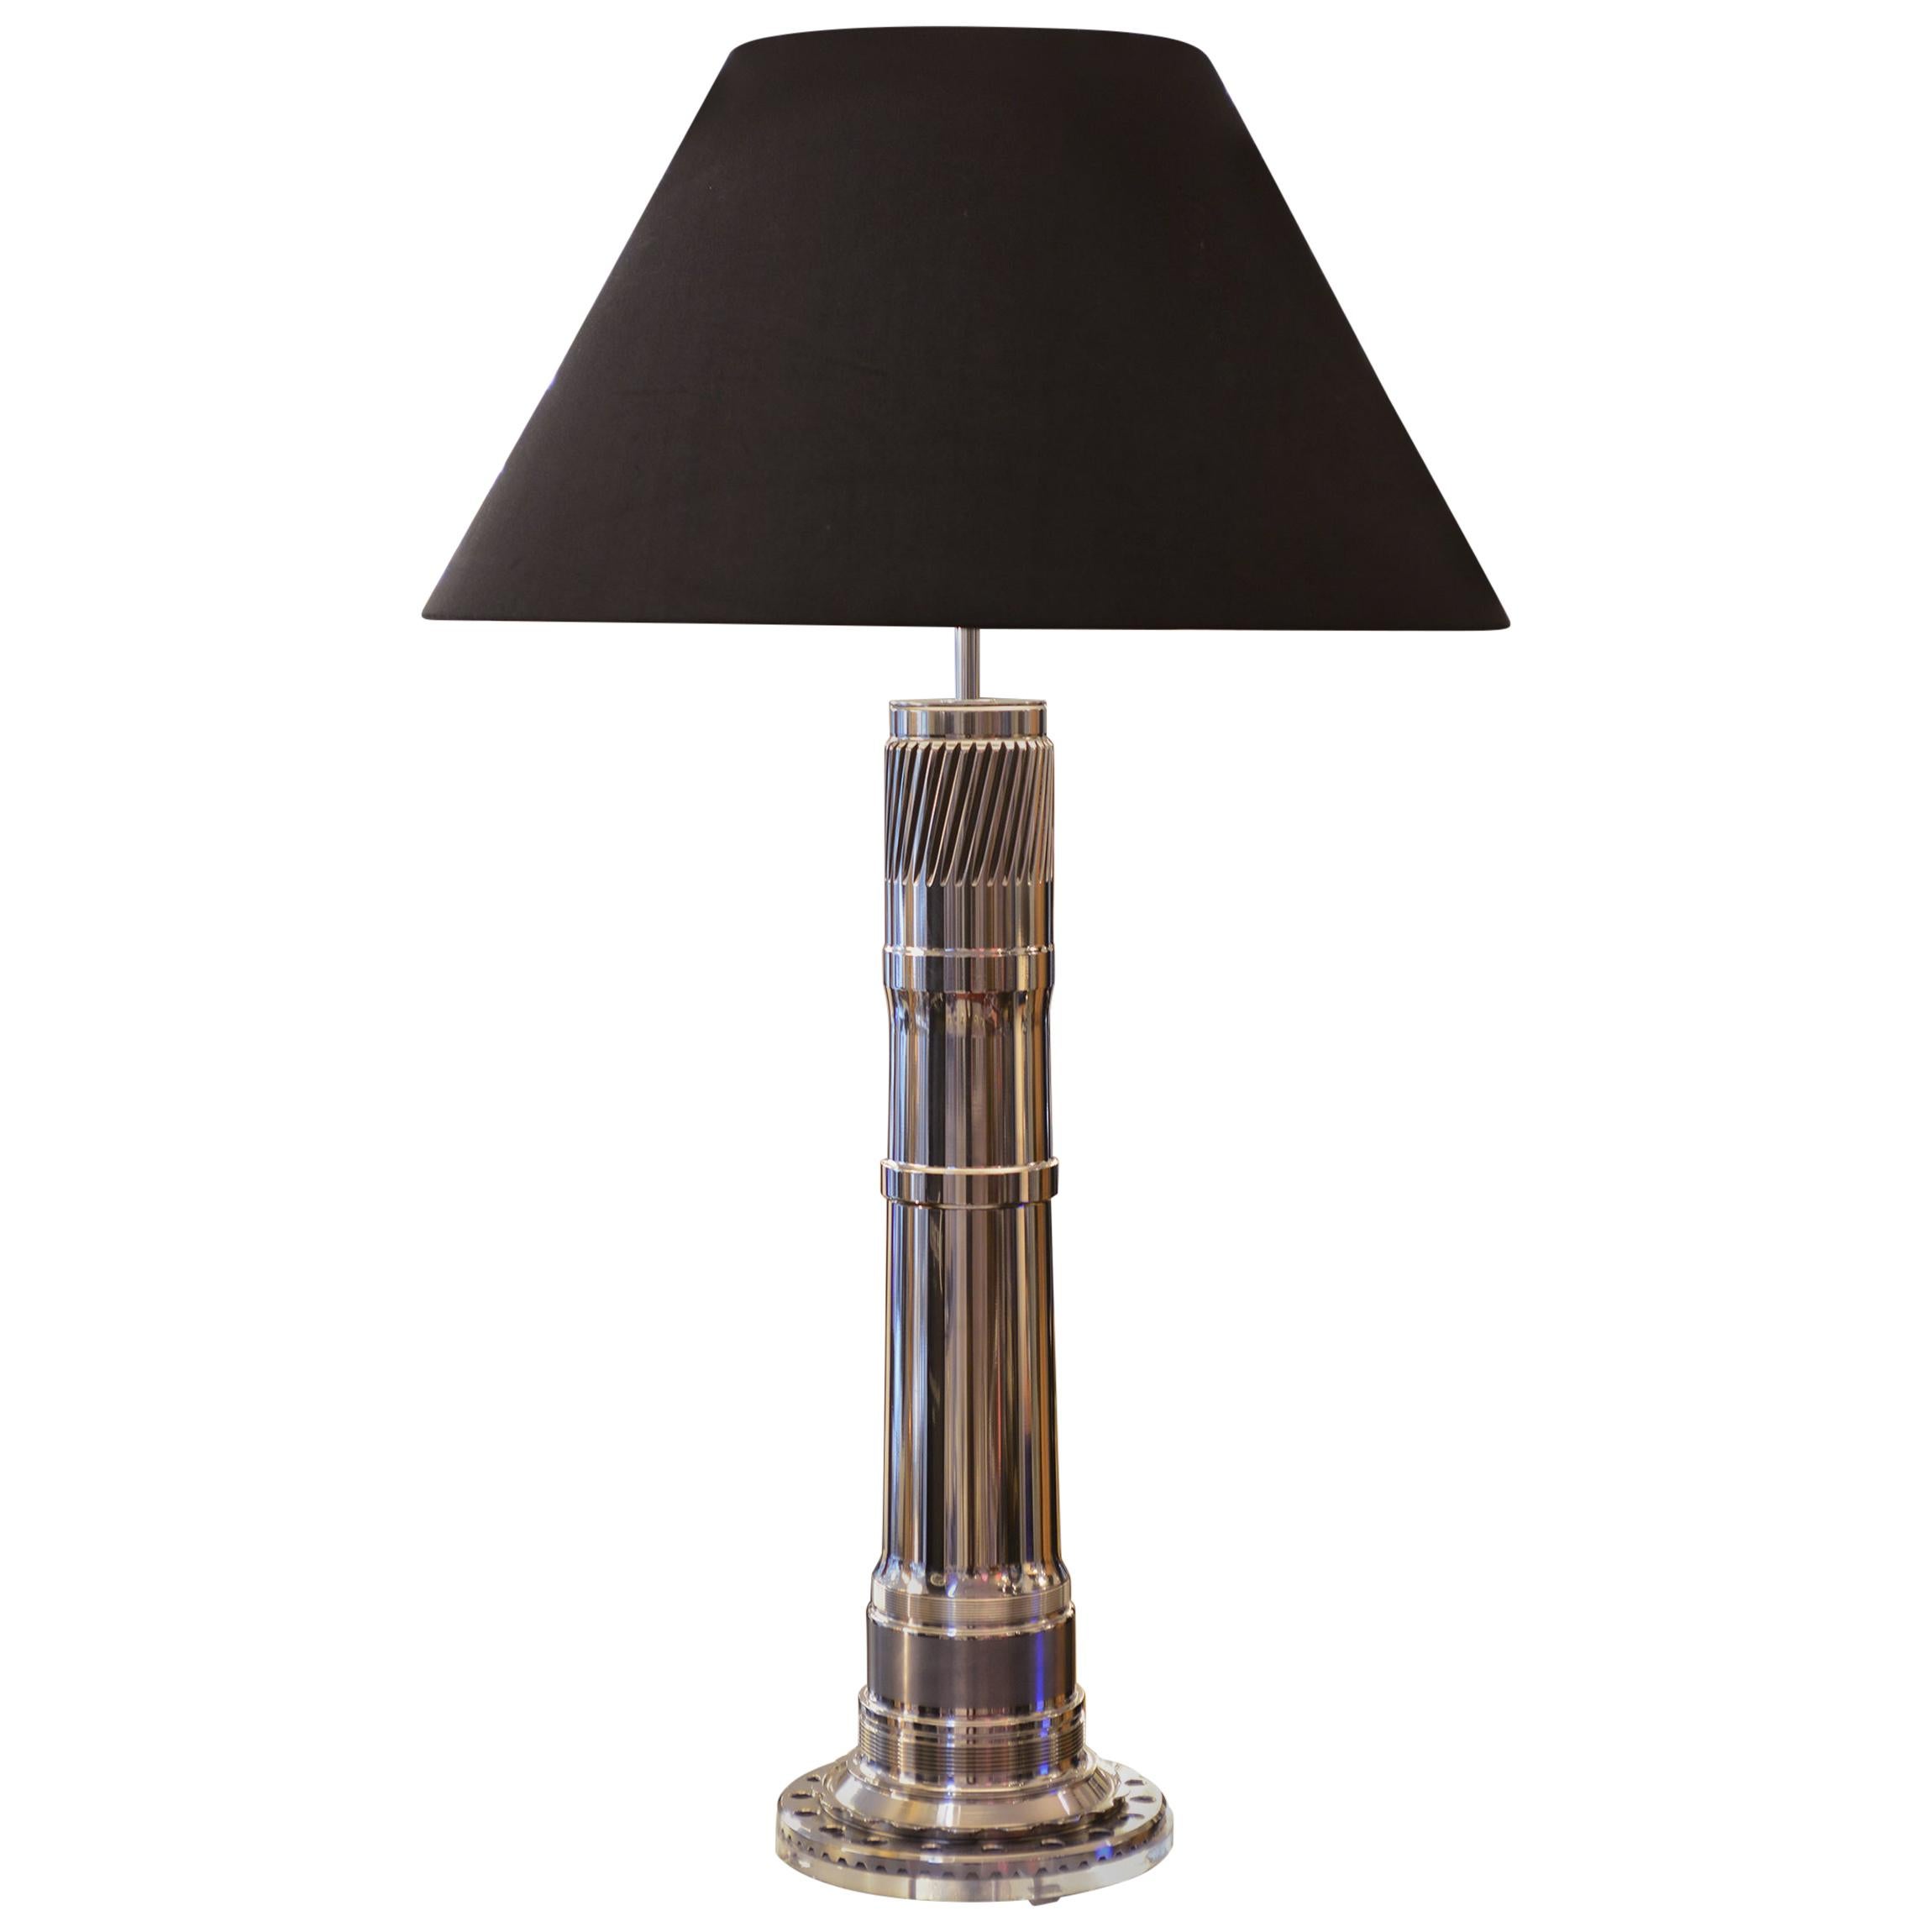 CFM56 Turbine Axis Table Lamp For Sale